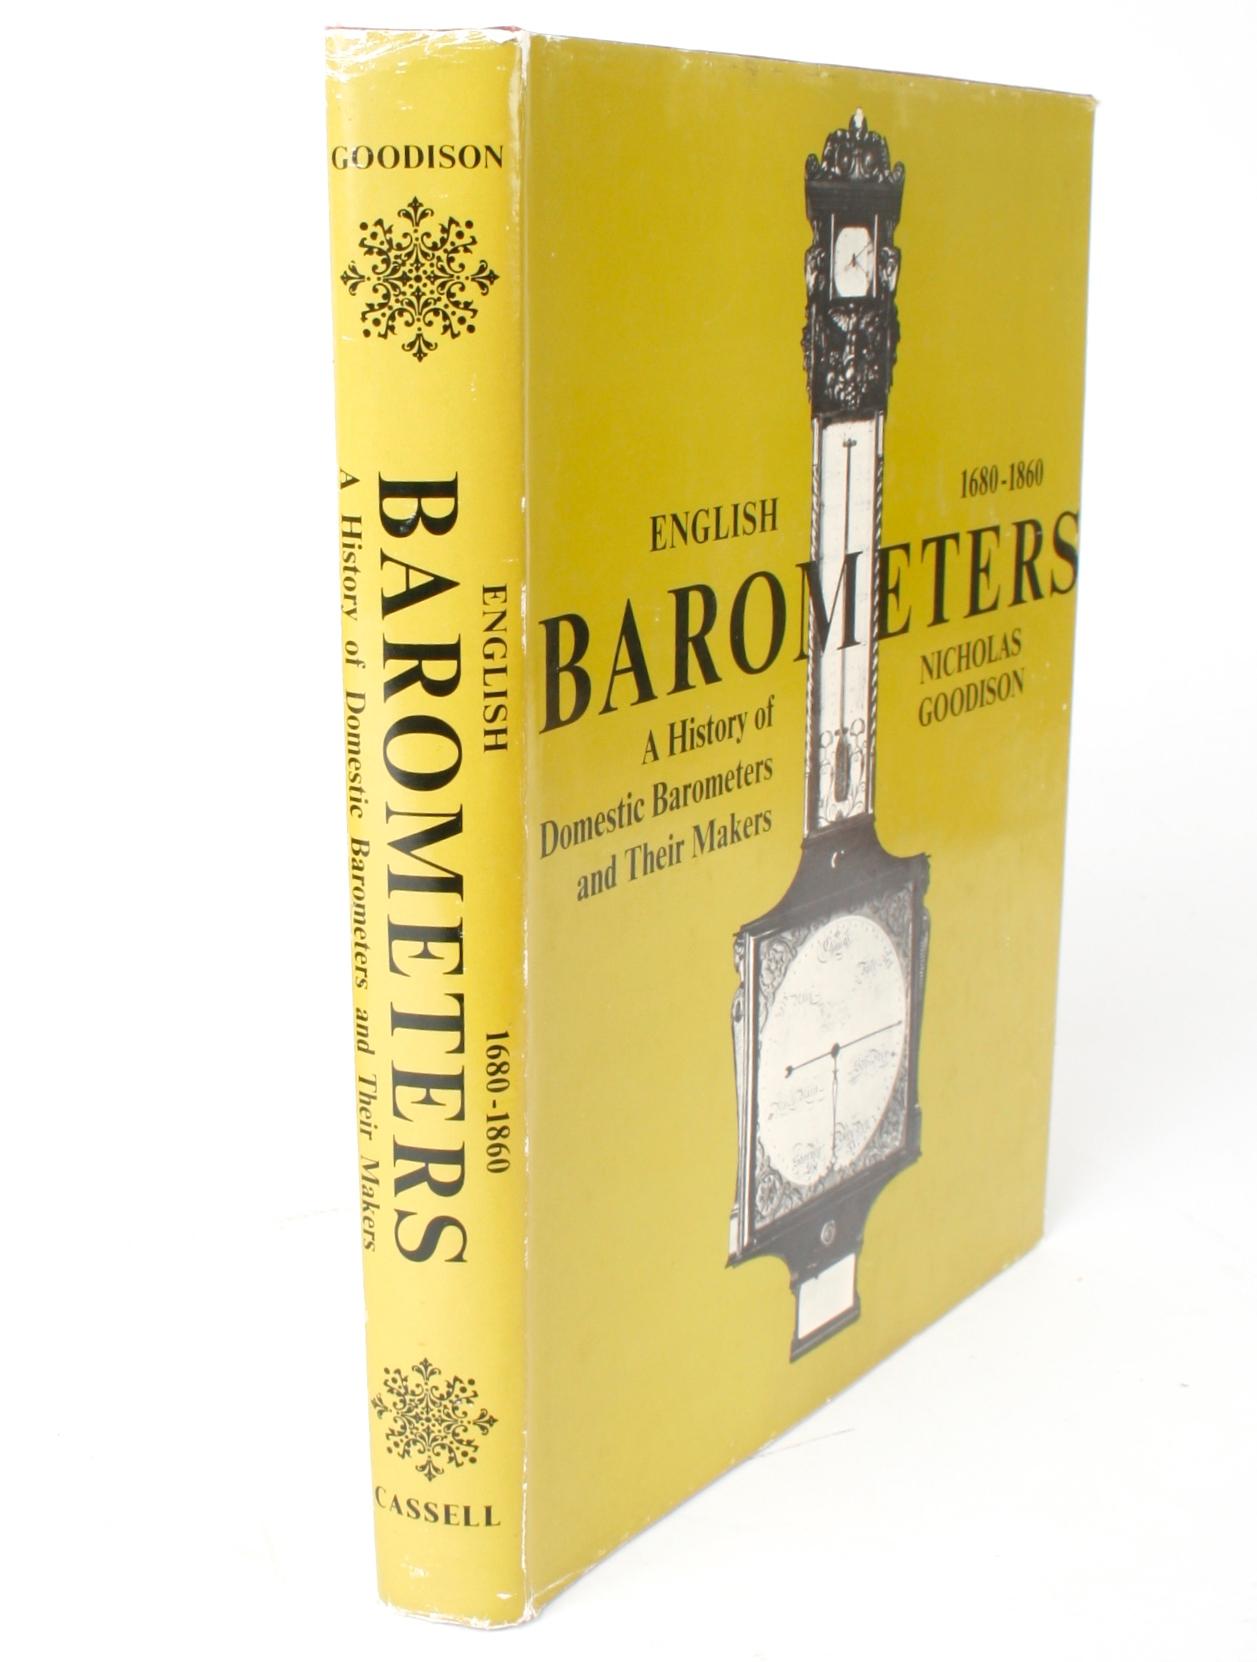 English Barometers, 1680-1860 by Nicholas Goodison, First Edition Book 12